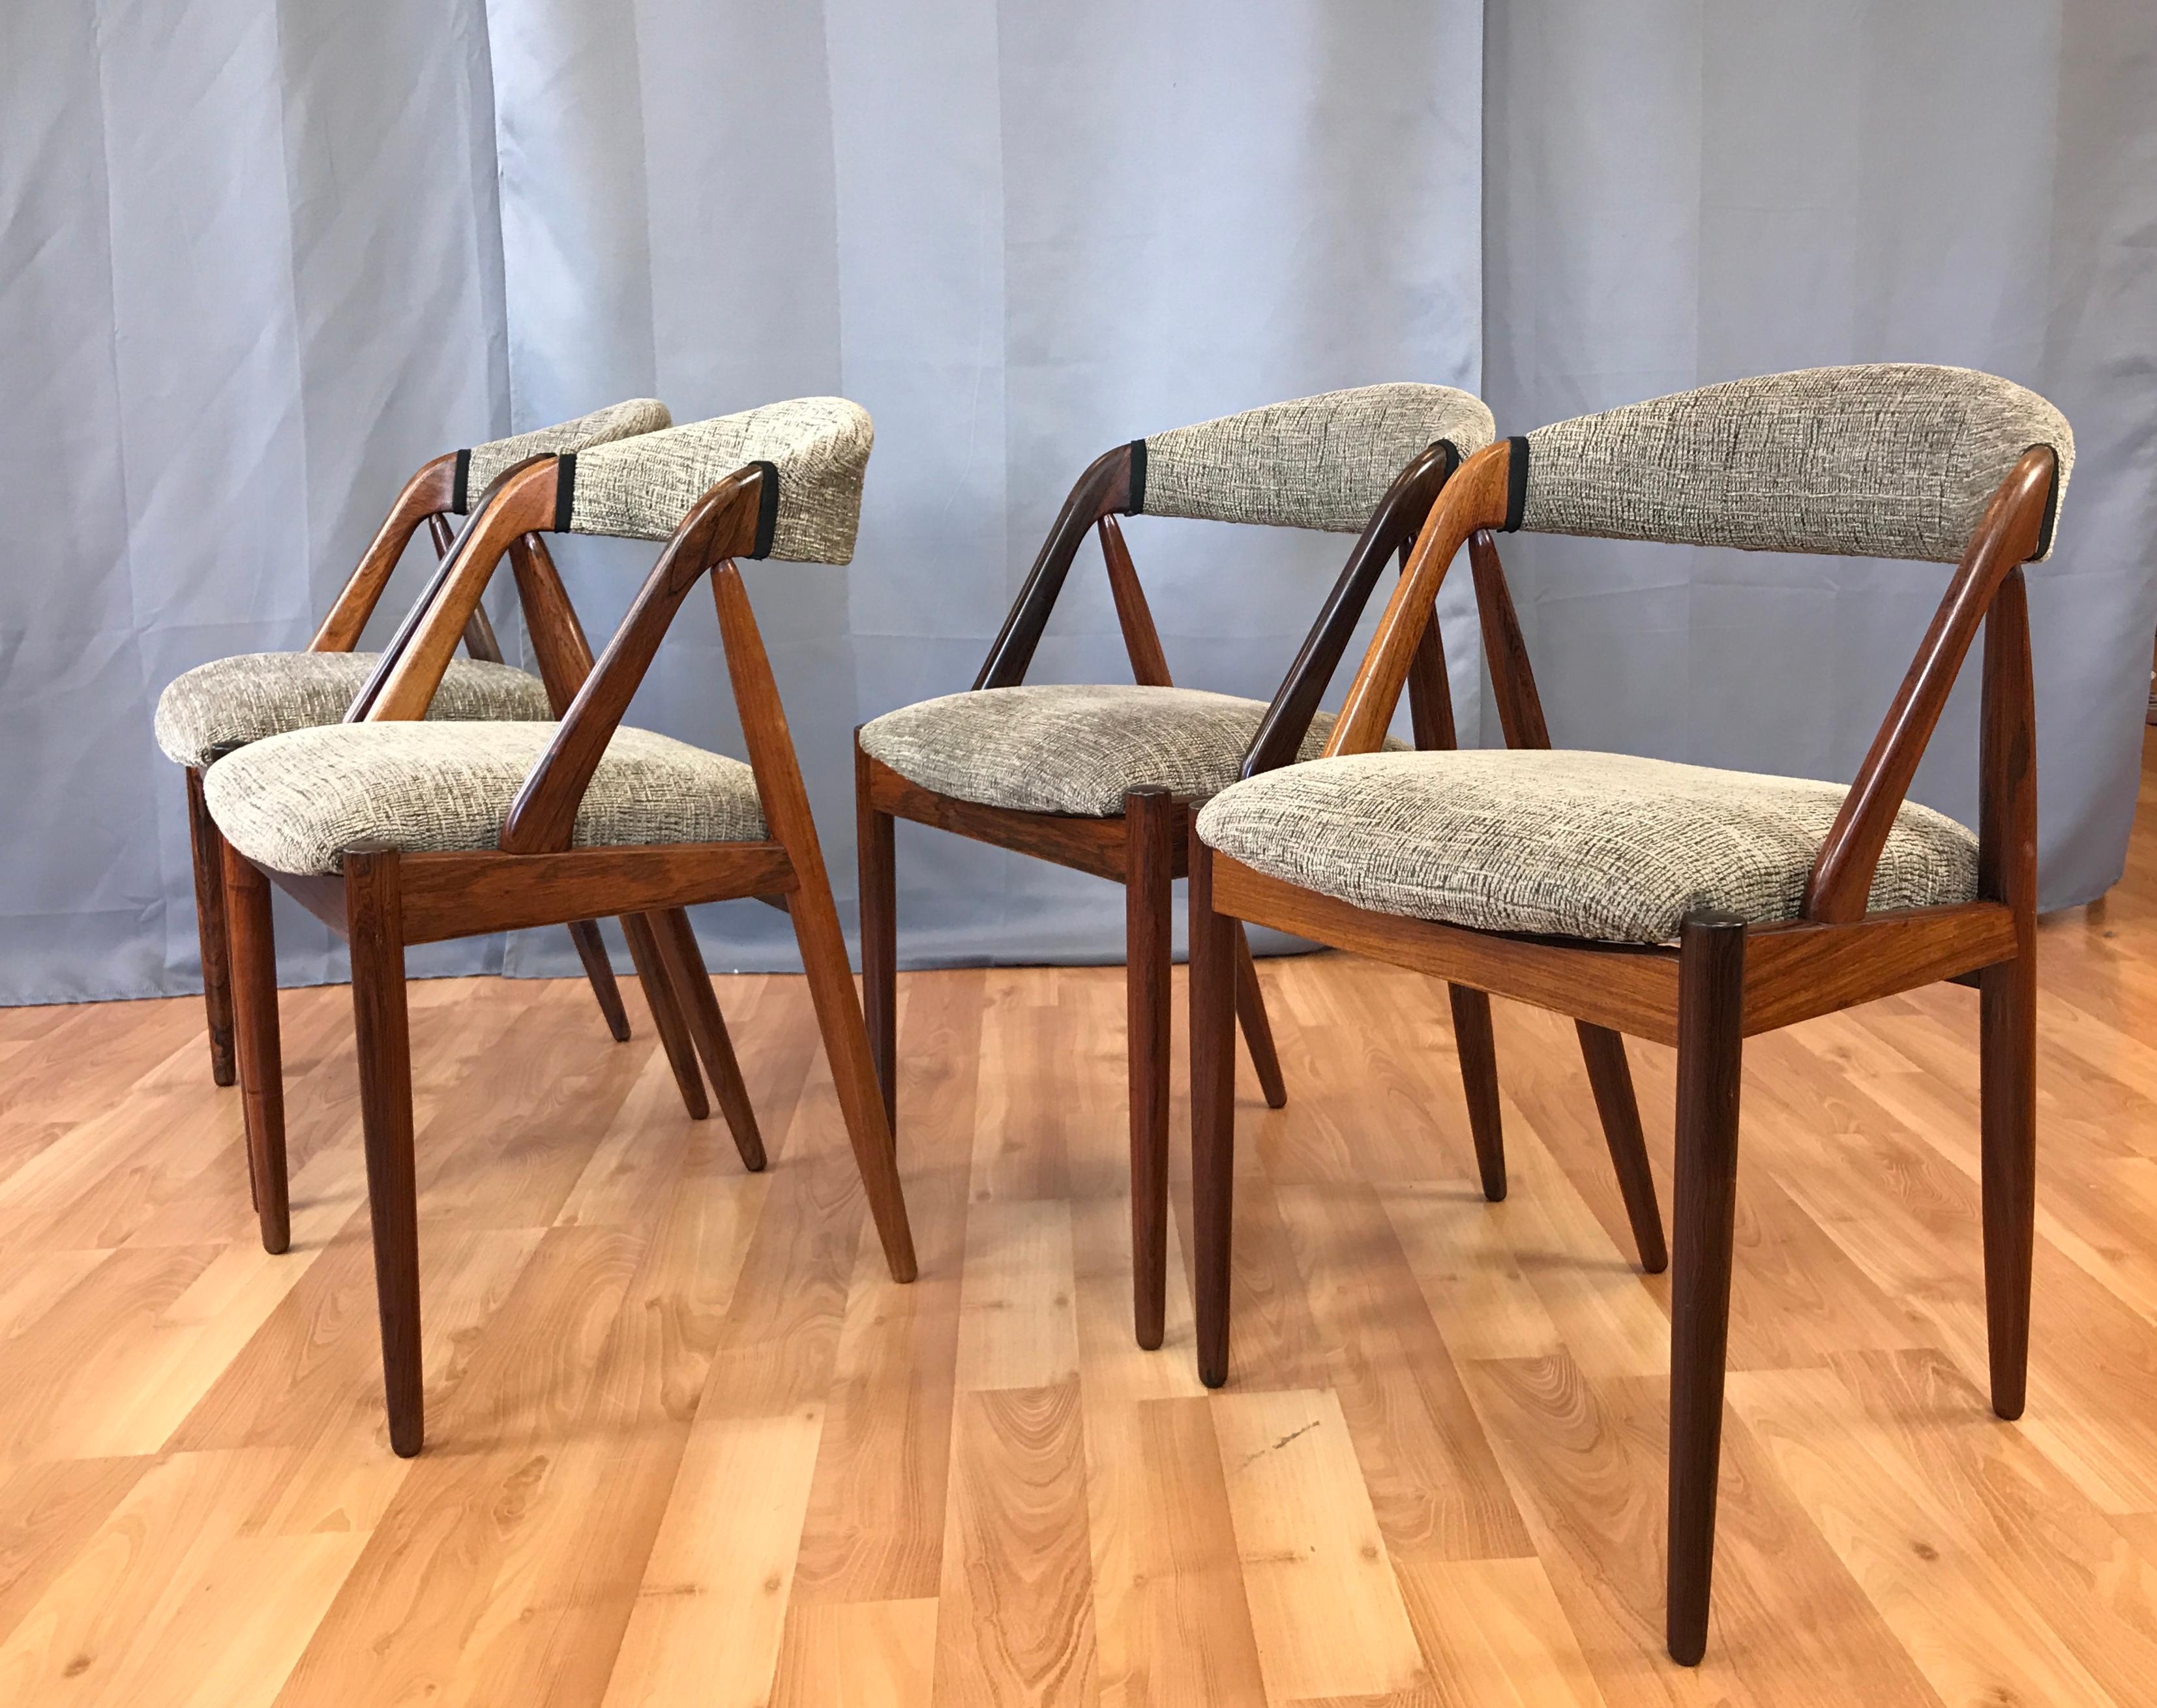 A 1960s Danish Modern set of four Model 31 rosewood dining chairs by Kai Kristiansen for Schou Anderson Møbelfabrik.

One of Kristiansen’s most desirable and enduring designs. Solid rosewood frames recently reupholstered in very handsome dark cream